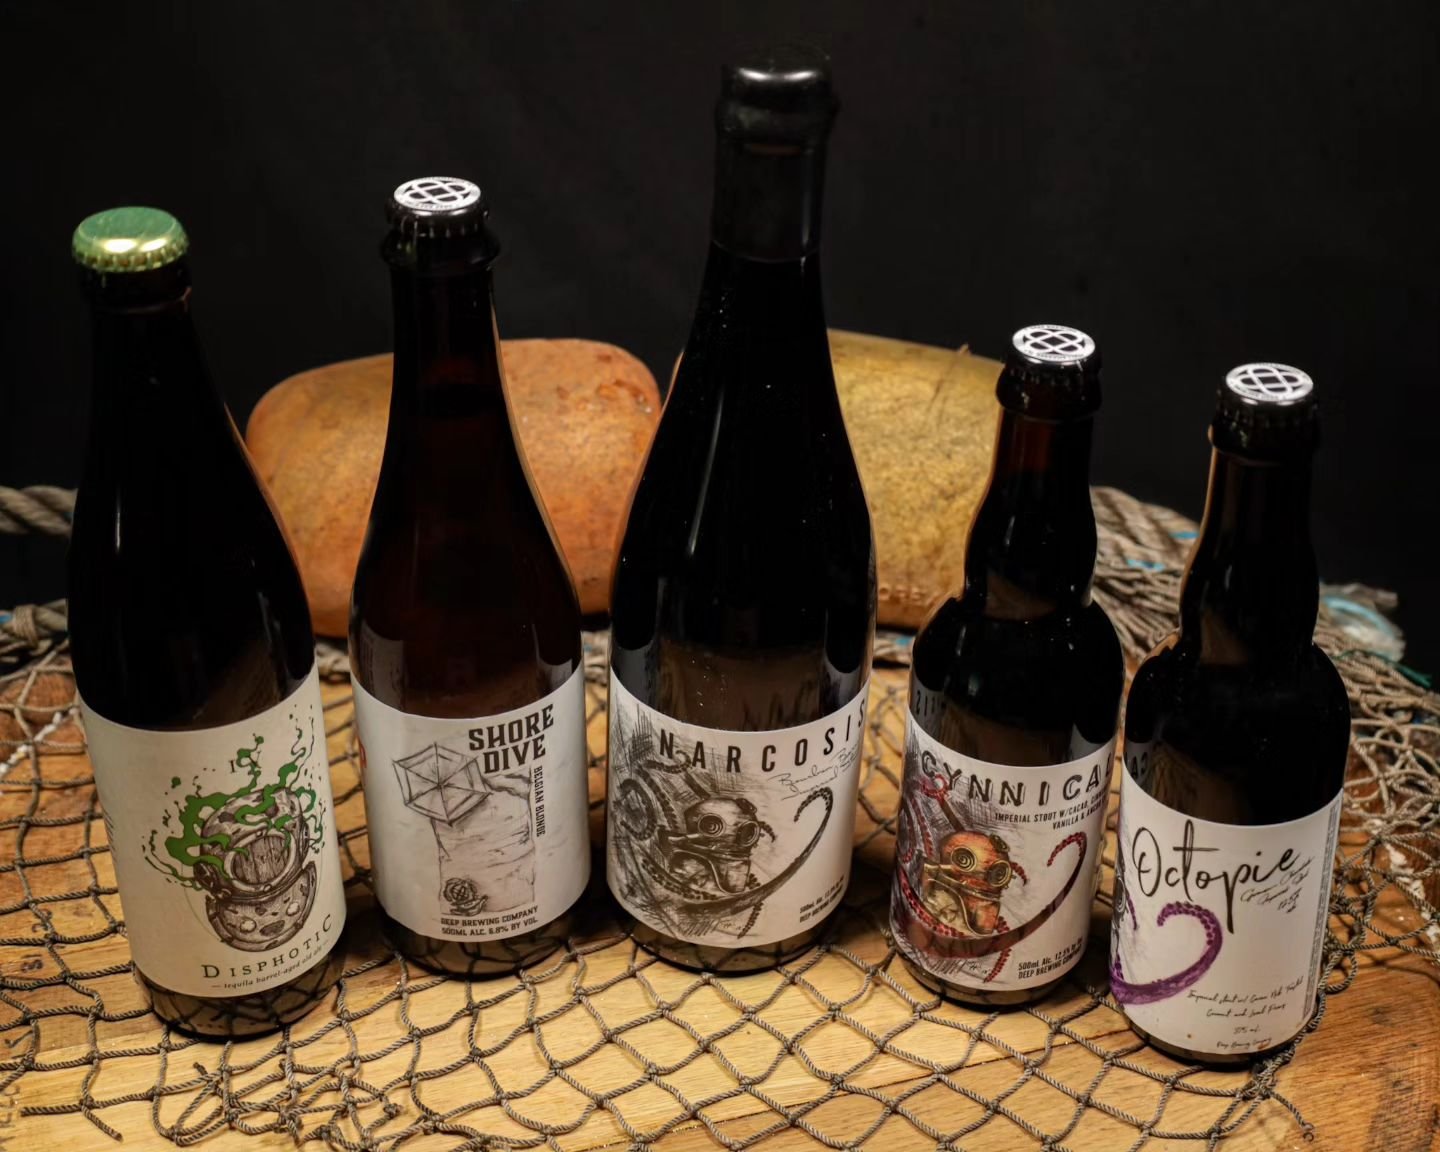 Looking for some bottles to cellar or pop with friends? Well, we've got FIVE in stock right now to choose from!

From left:

* DISPHOTIC - Old Ale. Collab with @motorworksbrewing aged in red wine puncheons with aromas if cherry and spicy chai, oak-ti